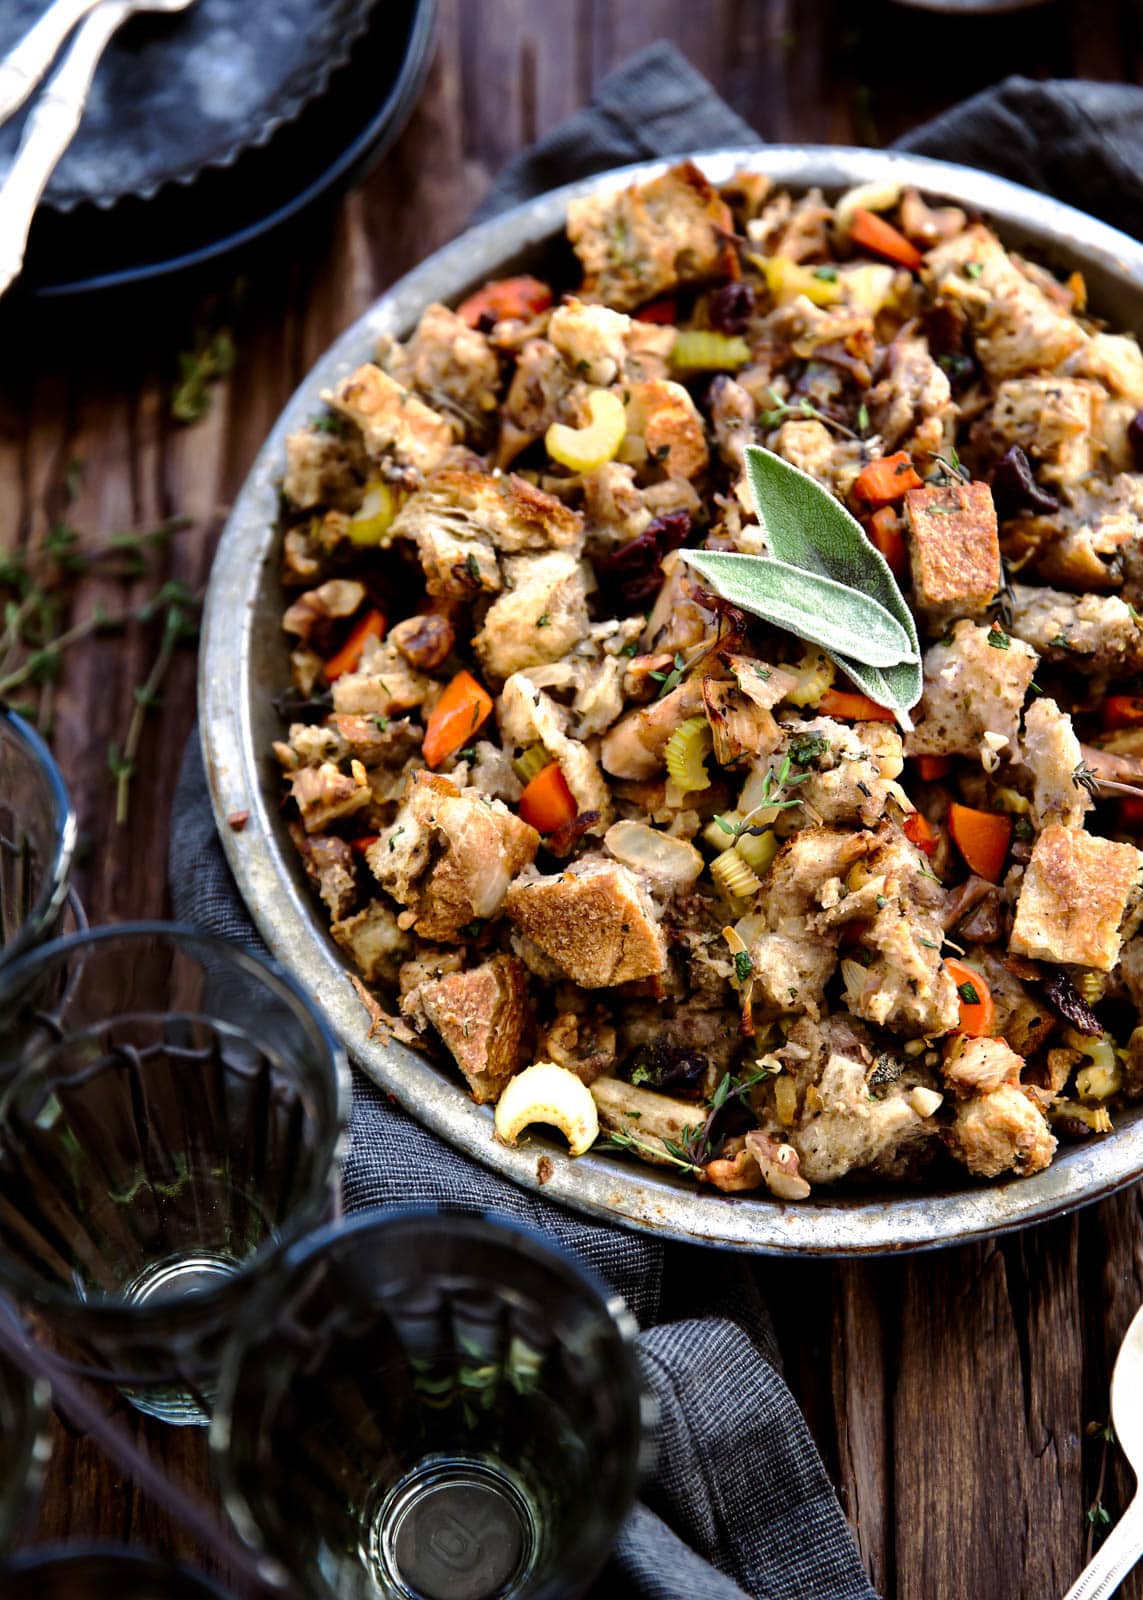 The best part of Thanksgiving is stuffing. So why not make the ultimate Thanksgiving stuffing with sourdough, dark meat chicken, dried cherries, walnuts, and loads of herbs?